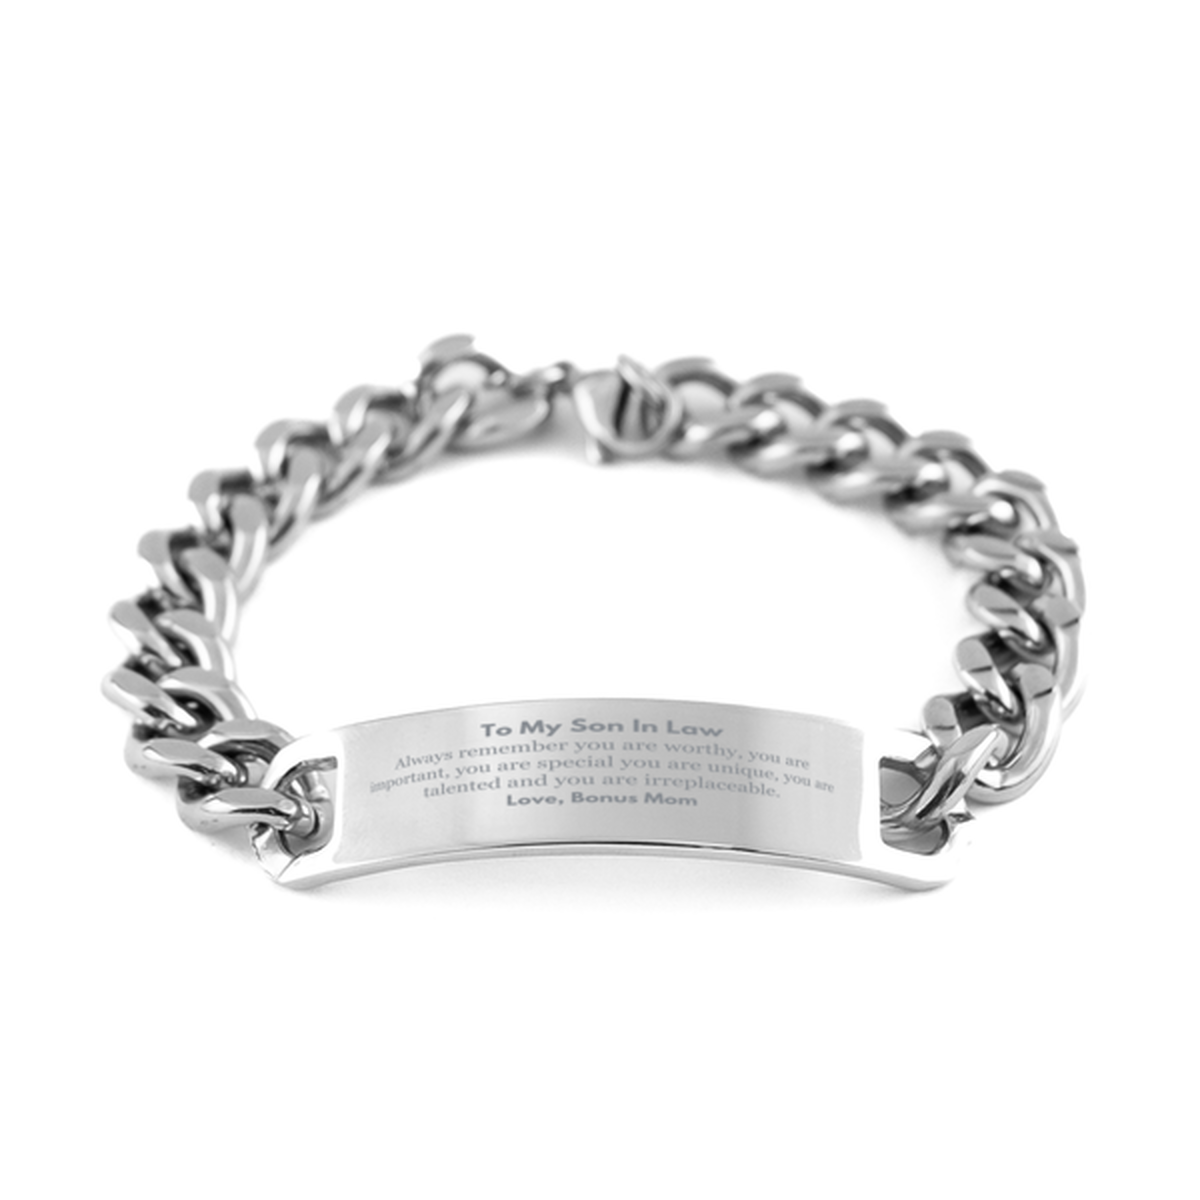 Son In Law Birthday Gifts from Bonus Mom, Inspirational Cuban Chain Stainless Steel Bracelet for Son In Law Christmas Graduation Gifts for Son In Law Always remember you are worthy, you are important. Love, Bonus Mom